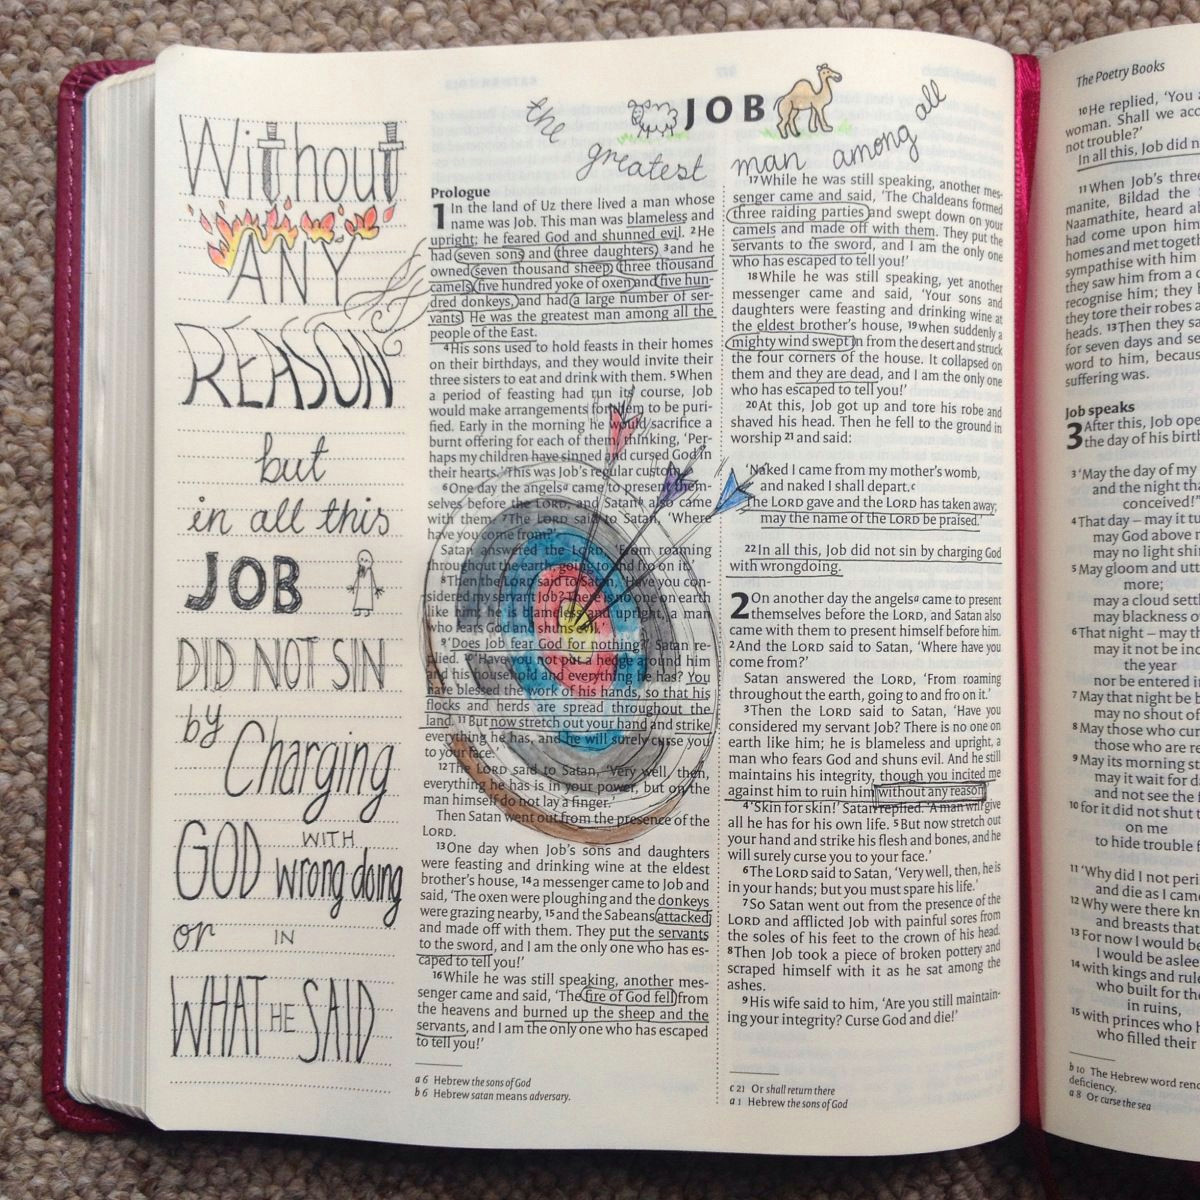 draw close blog job 1 suffering hope without any reason god speaks to satan god causes all things to work for good bible art bible journaling